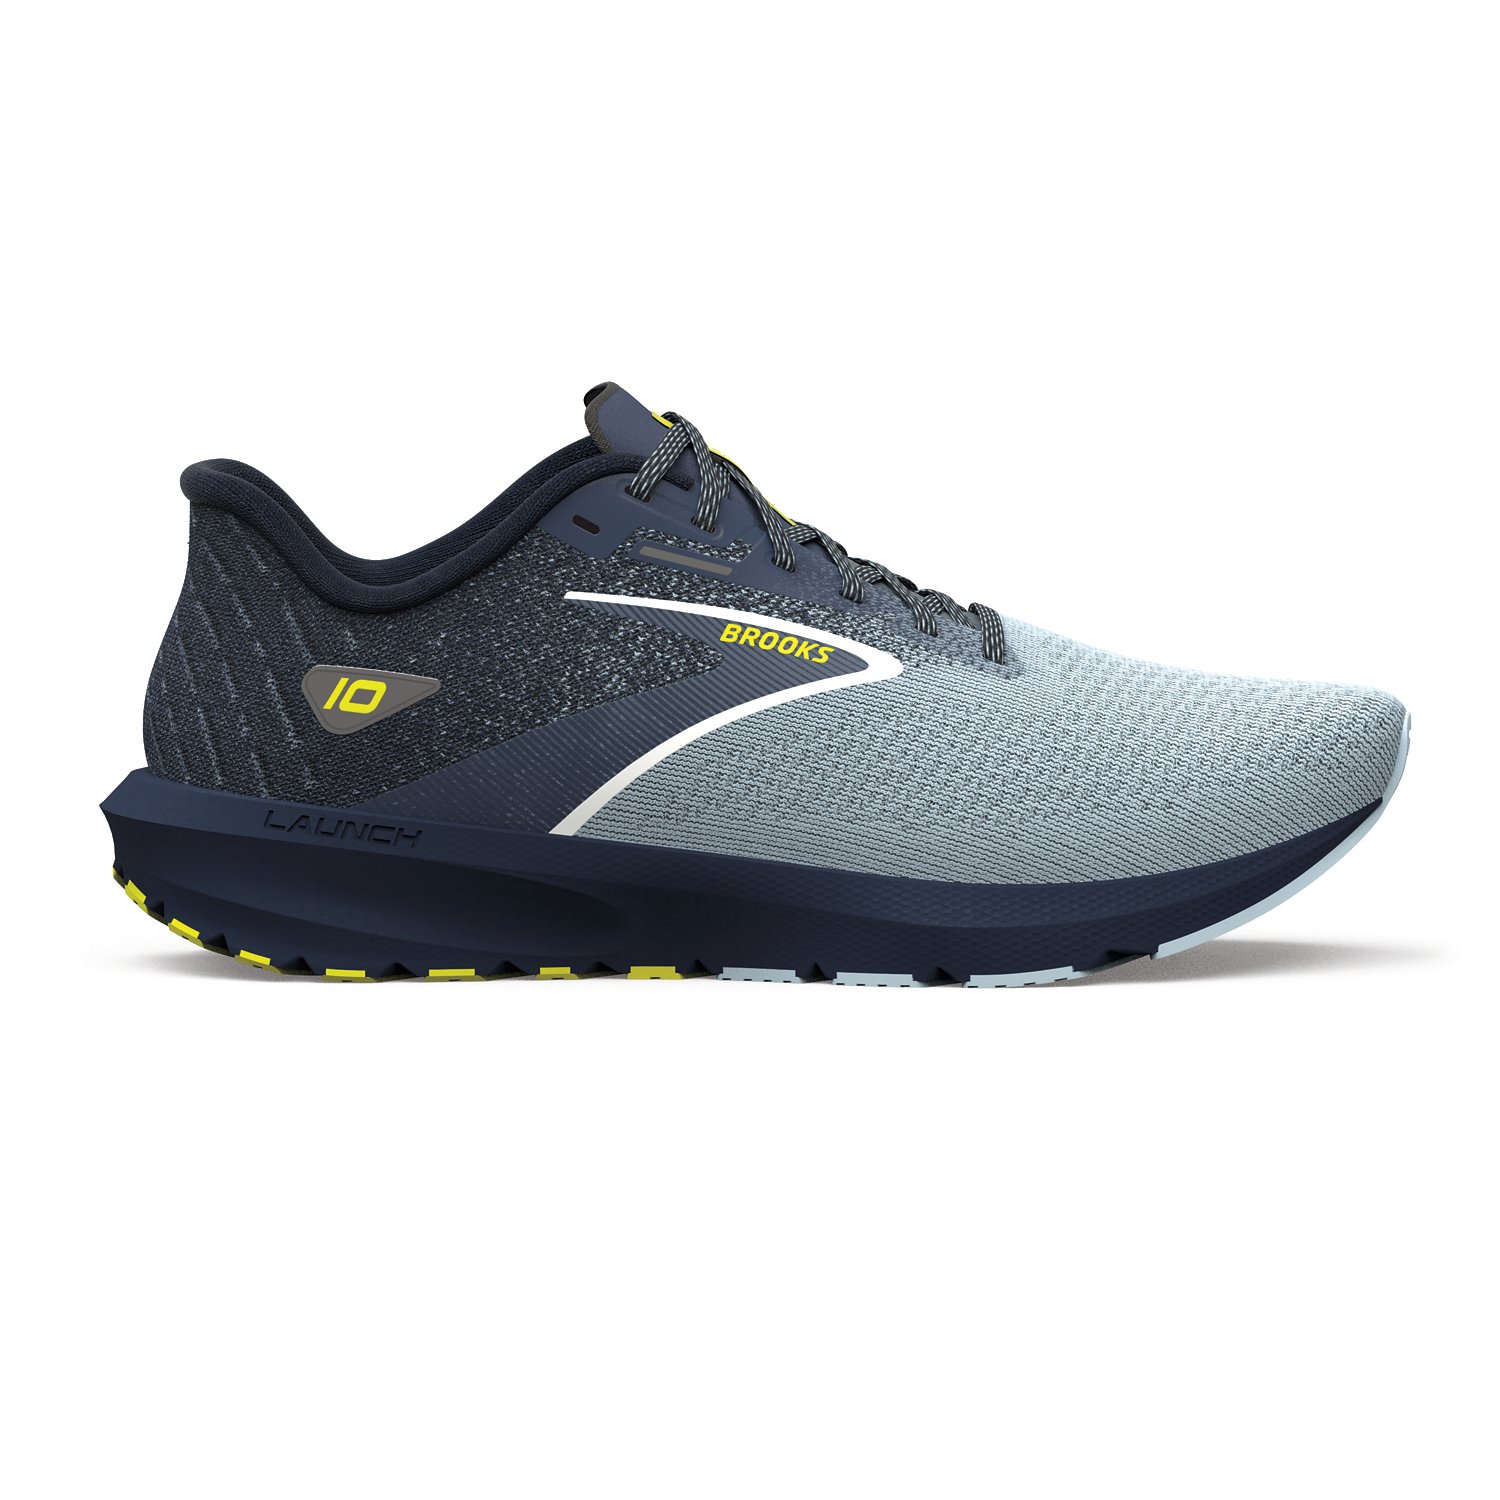 https://academy.scene7.com/is/image/academy//running-shoes/brooks-mens-launch-10-running-shoes-110409-1d-009-blue/c8598e94-982f-4bc0-98d1-c5f849446018?$pdp-mobile-gallery-ng$